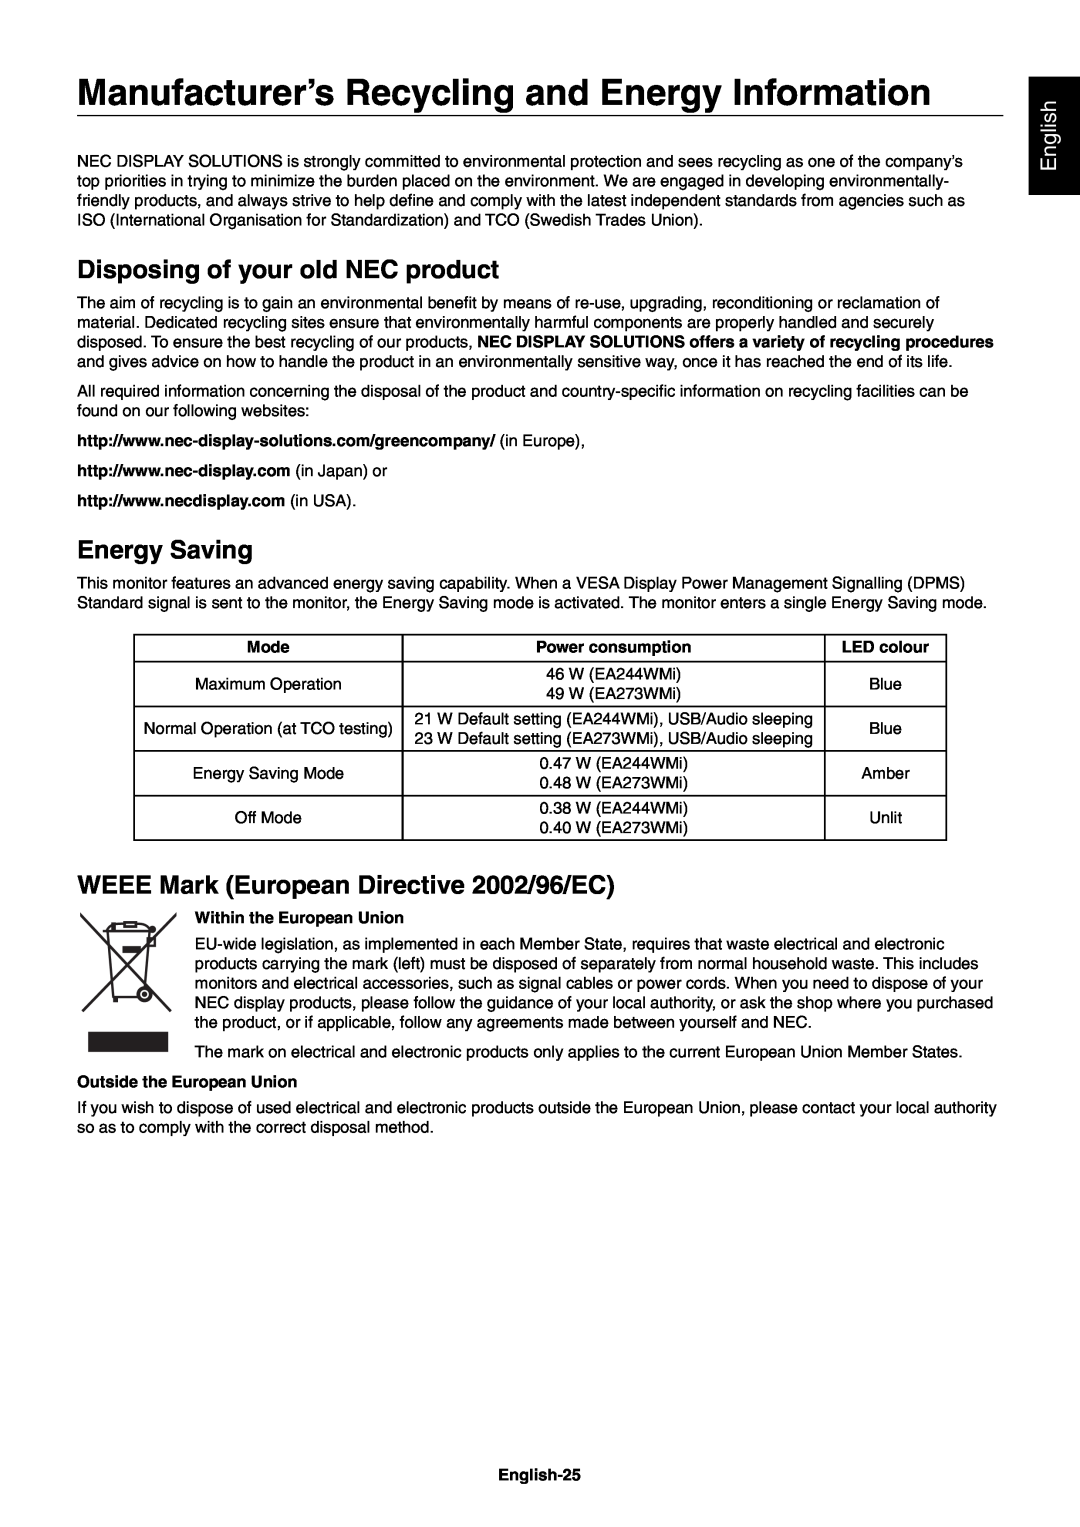 NEC EA244WMI-BK Manufacturer’s Recycling and Energy Information, Disposing of your old NEC product, Energy Saving, English 